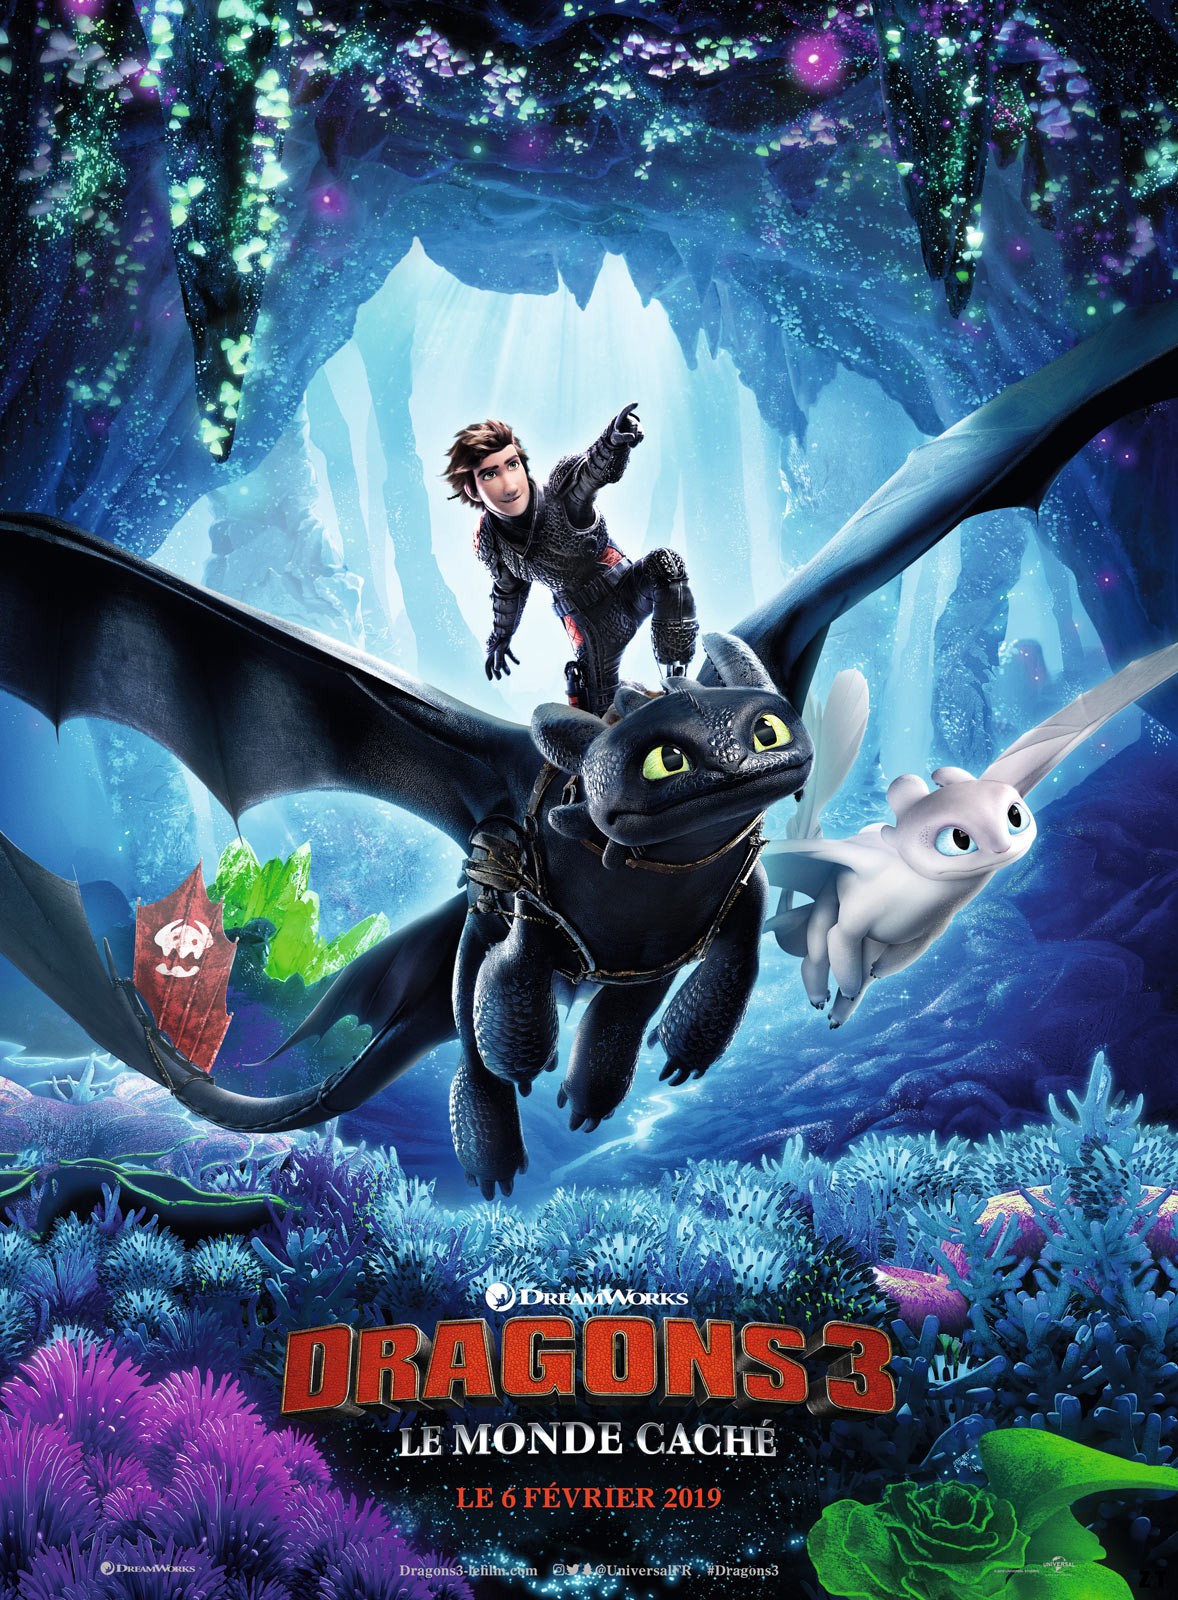 Dragons 3 : Le monde caché TRUEFRENCH DVDRiP 2019